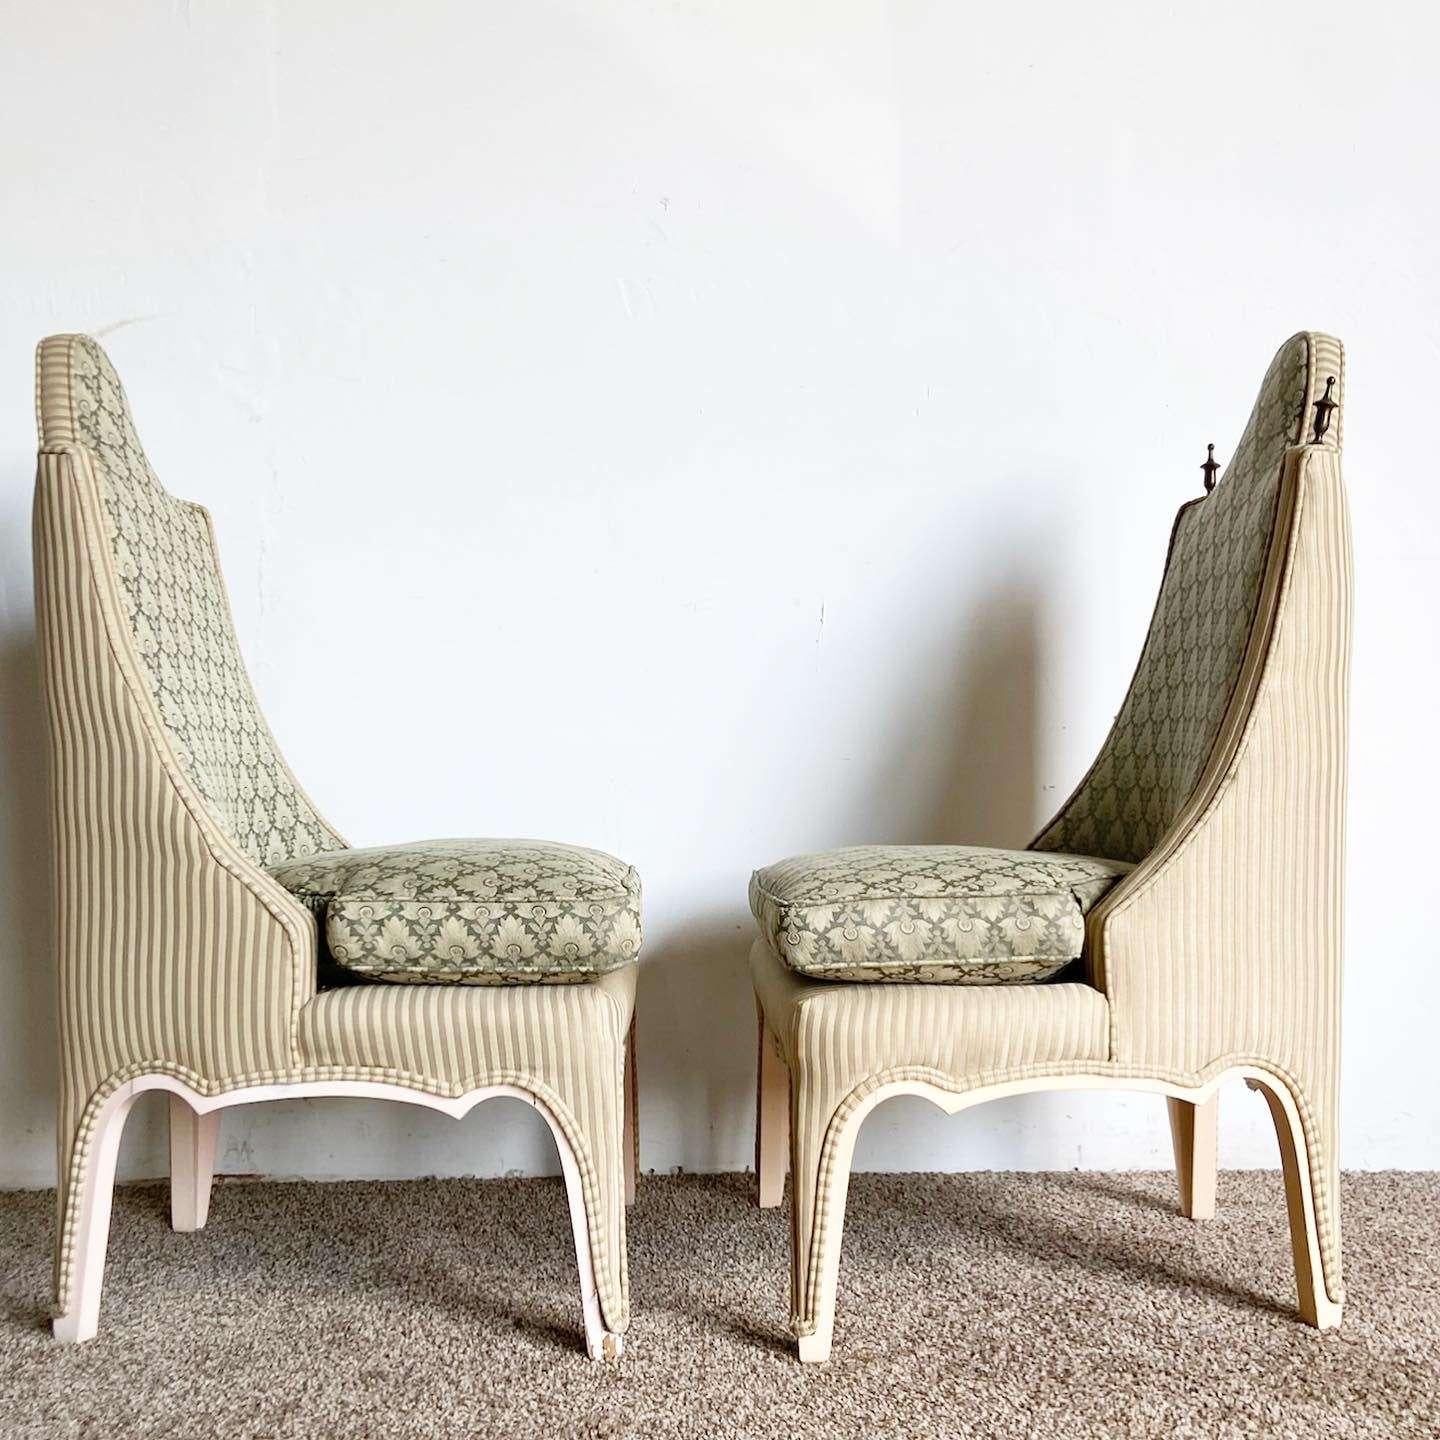 Regency Green and Tan Accent Chairs - a Pair In Good Condition For Sale In Delray Beach, FL